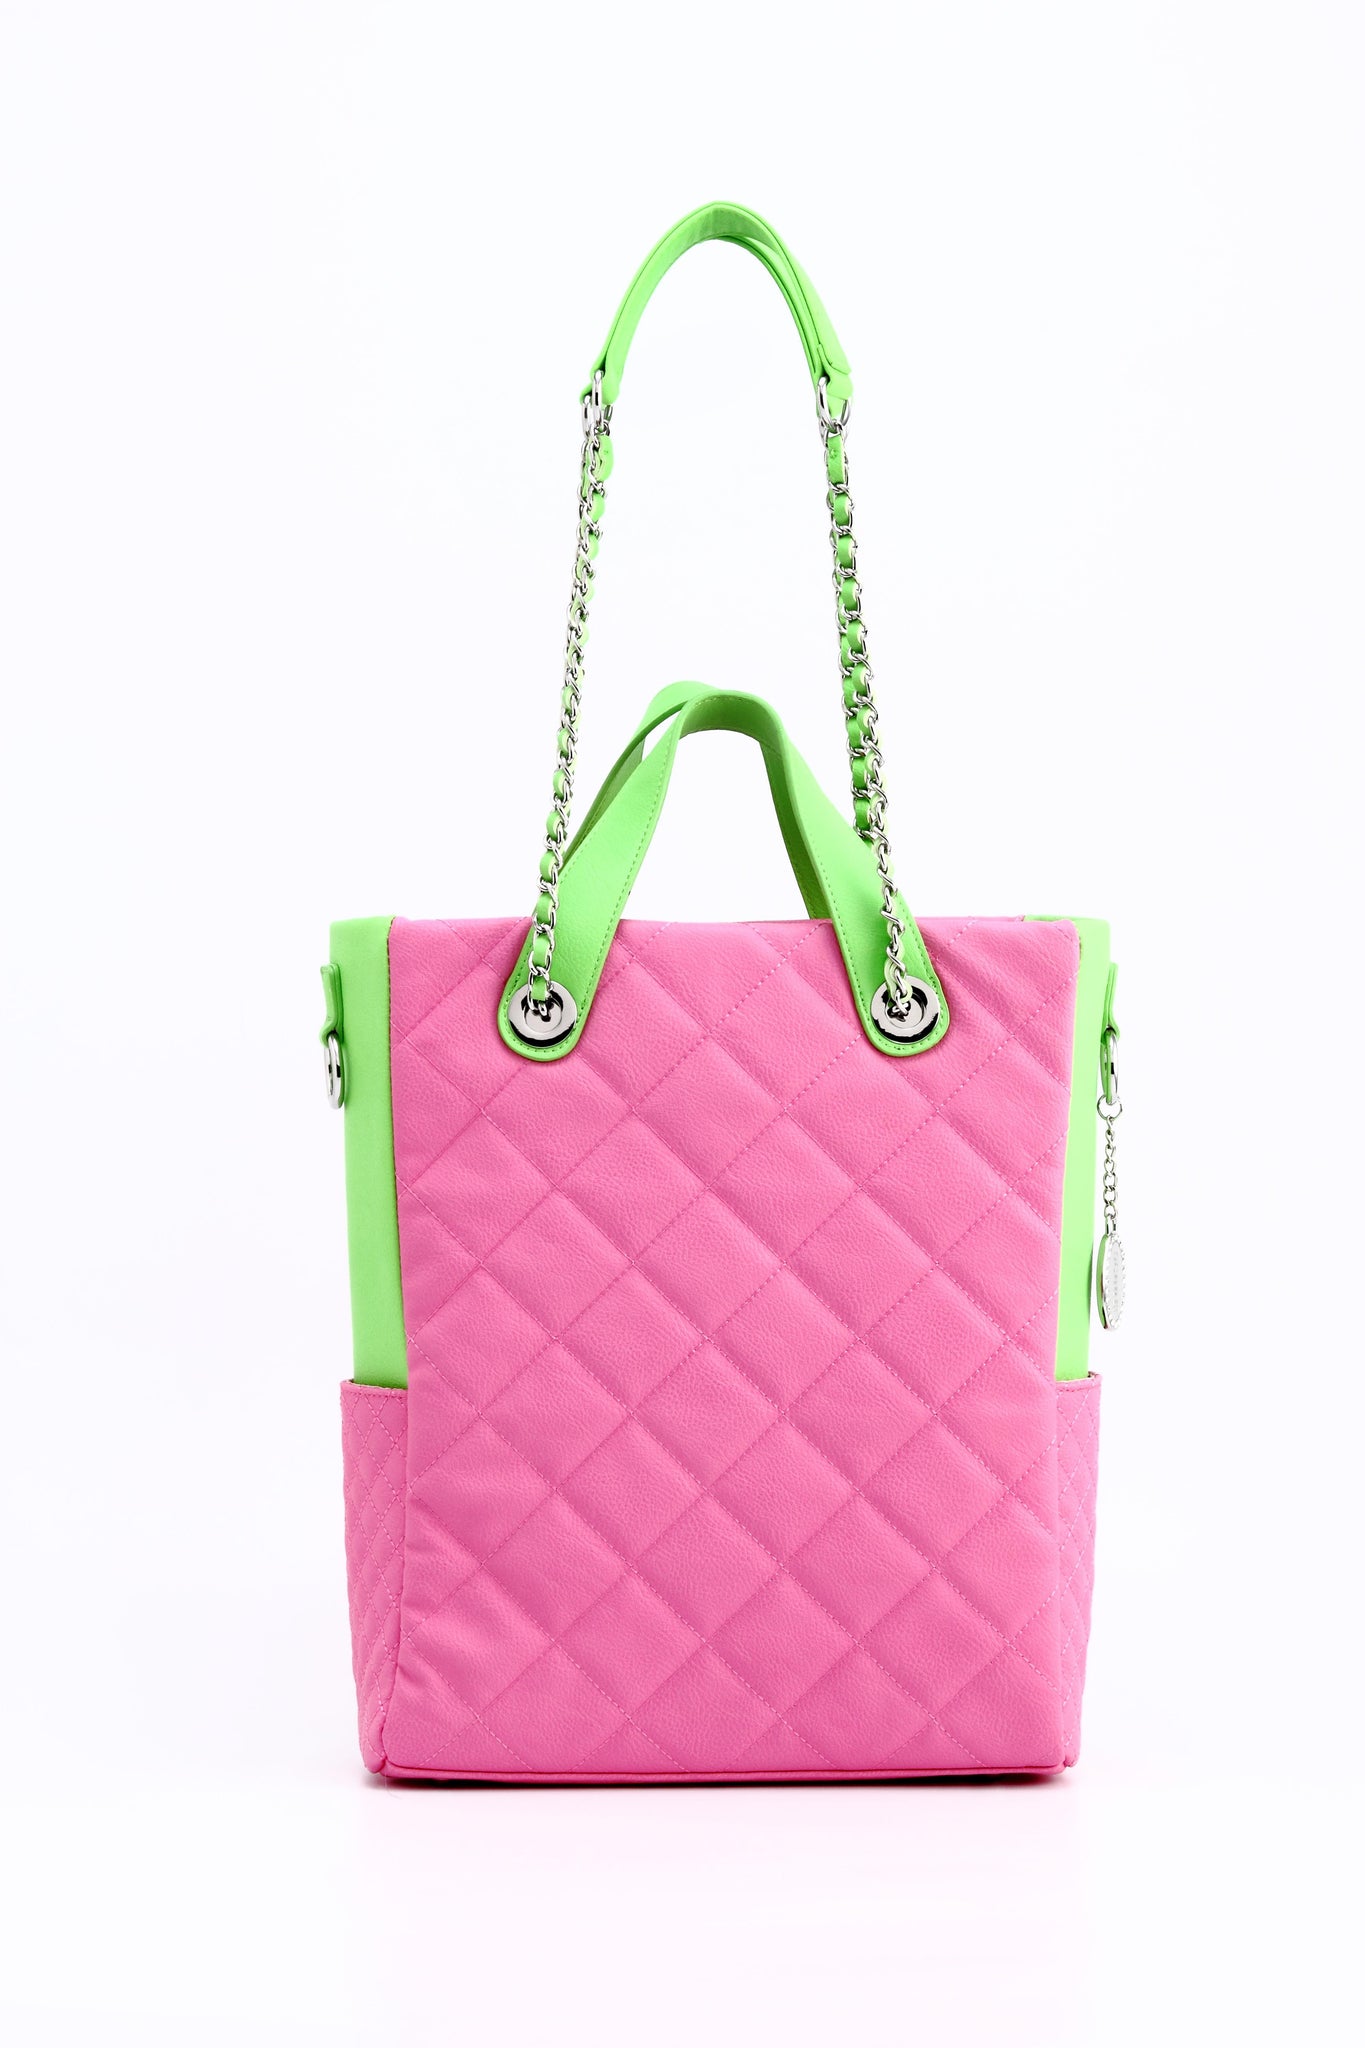 Quilted Women's Handbag, Quilted Tote Bags Women